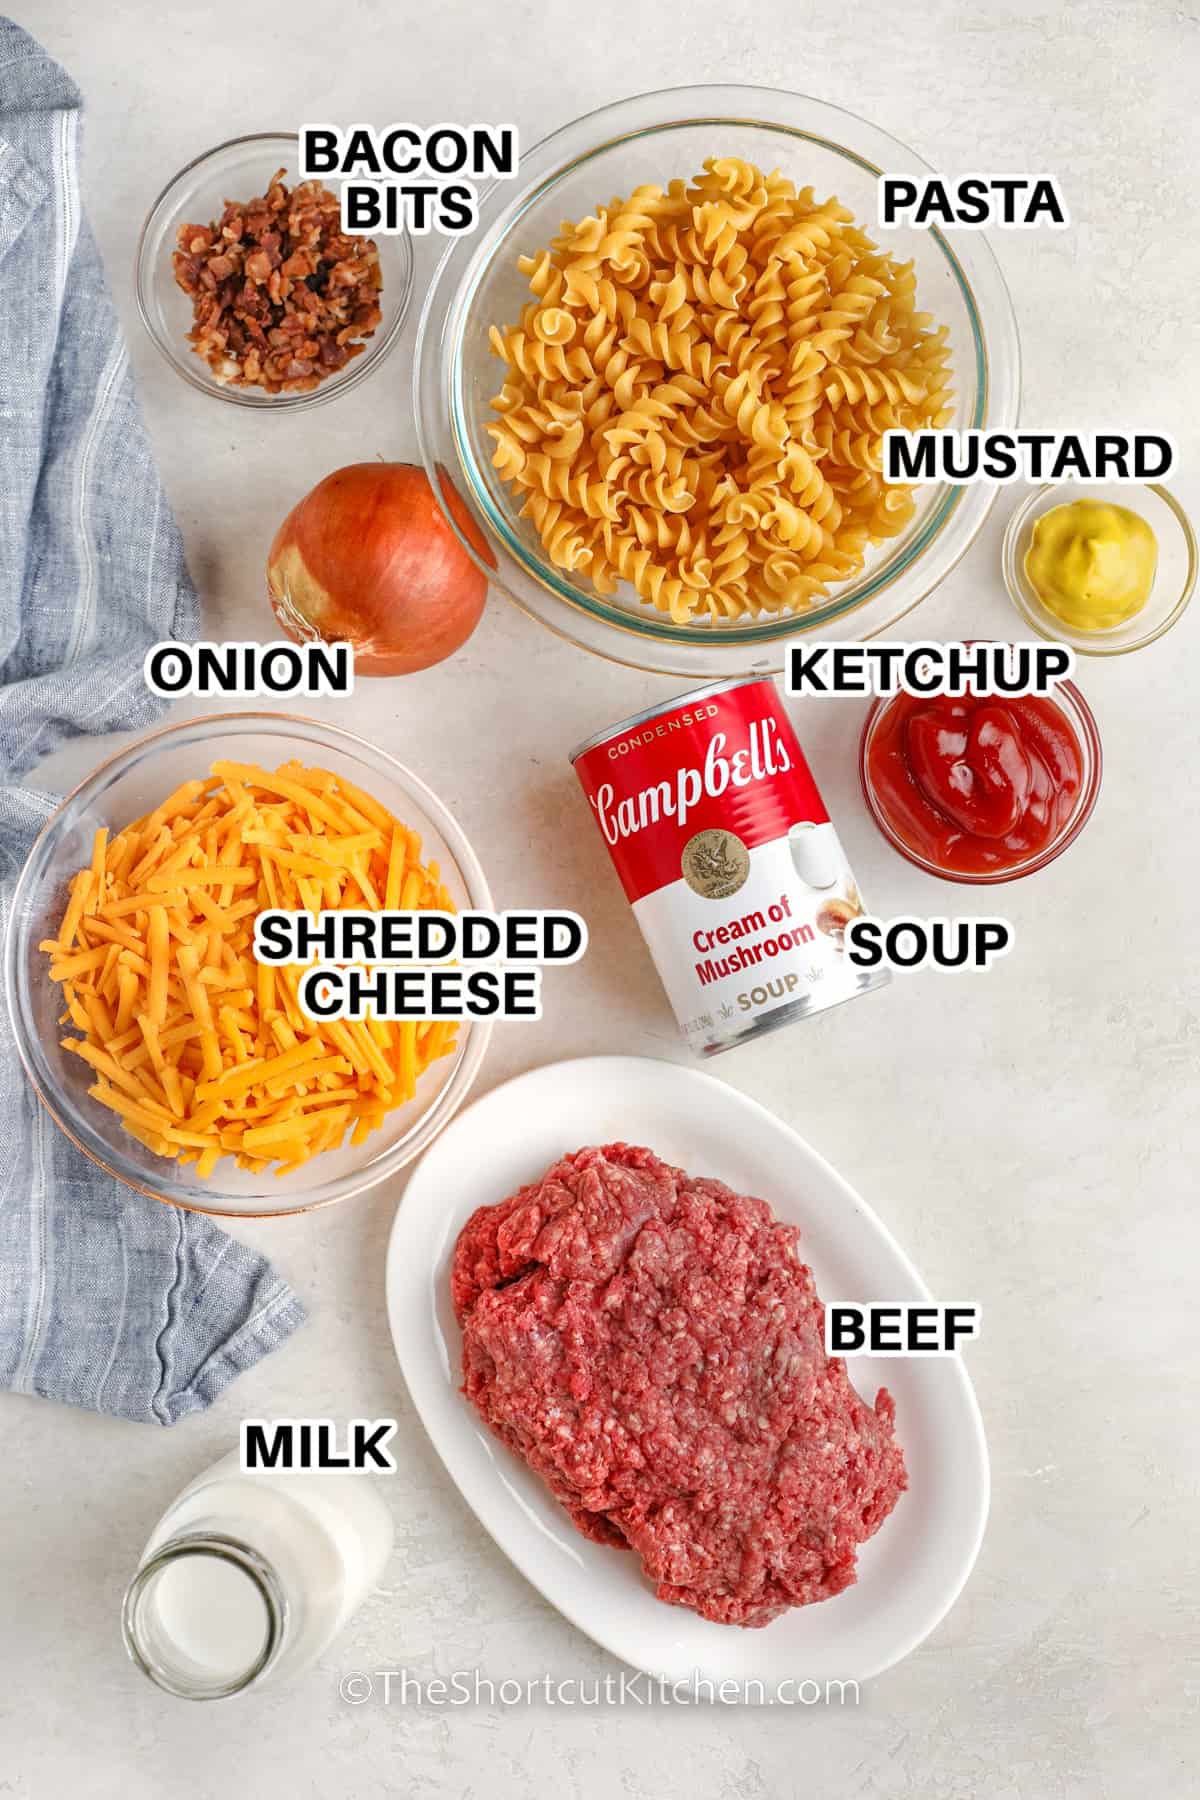 ingredients to make bacon cheeseburger casserole: bacon bits, pasta, mustard, ketchup, onion, shredded cheese, soup, beef, and milk